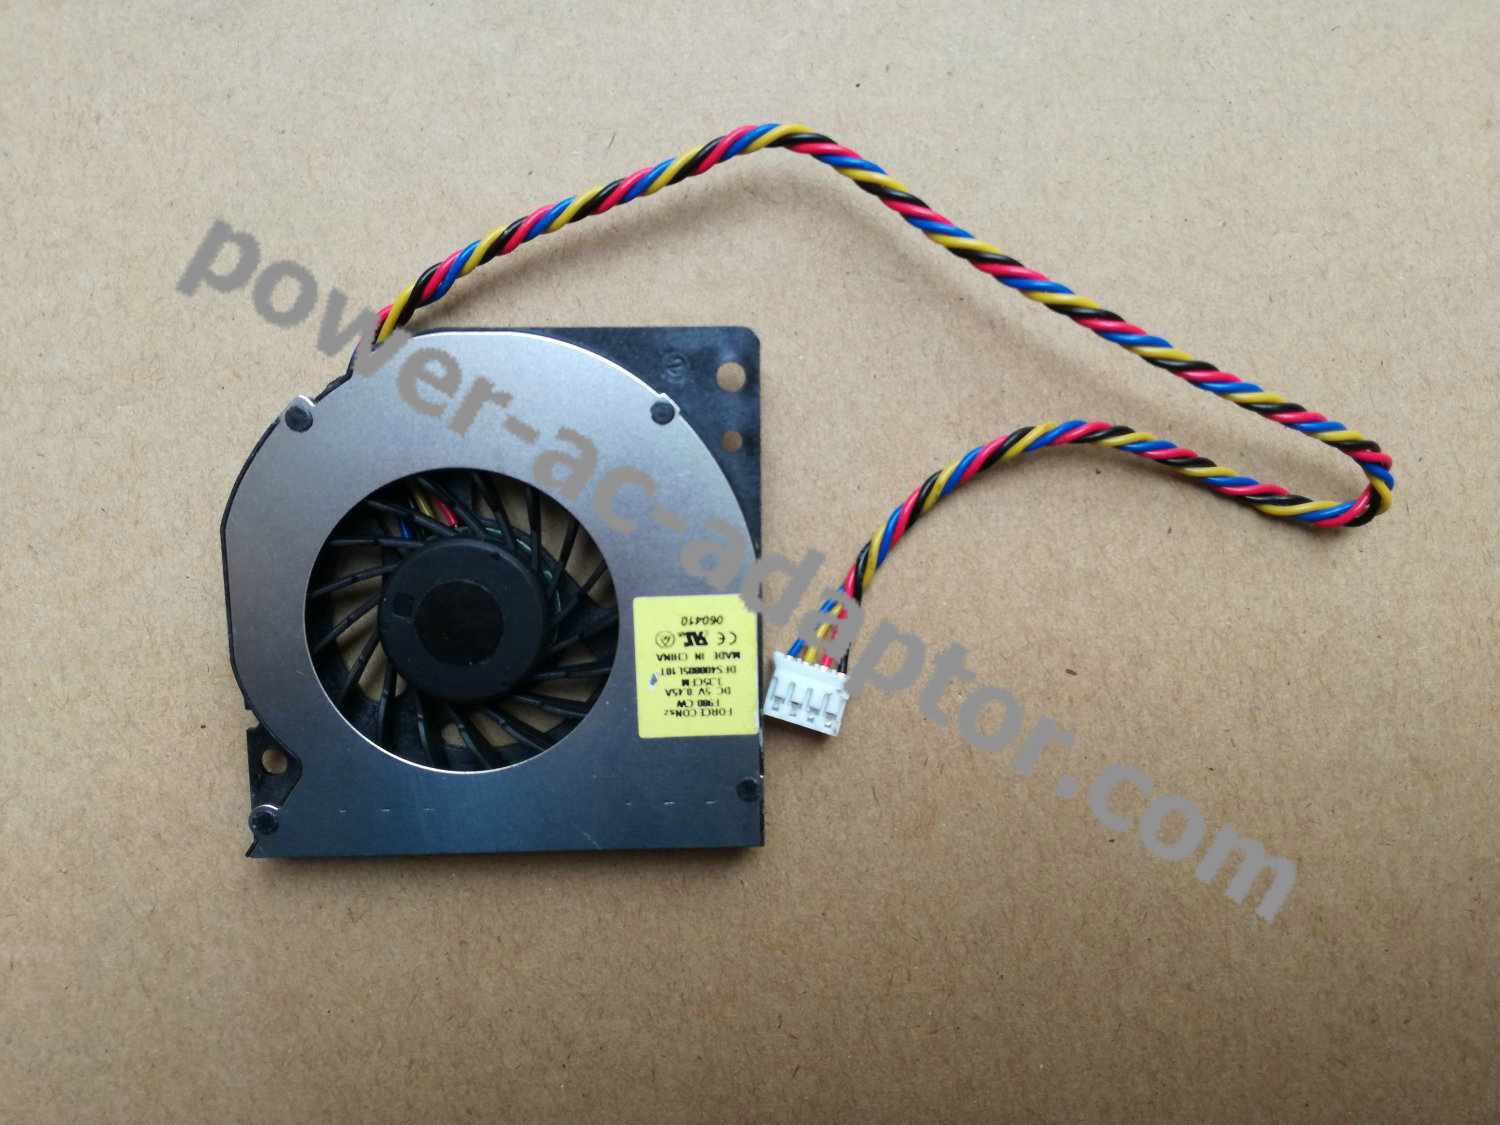 Dell Inspiron One 19 One machine System Cooling Fan W857R 0W857R